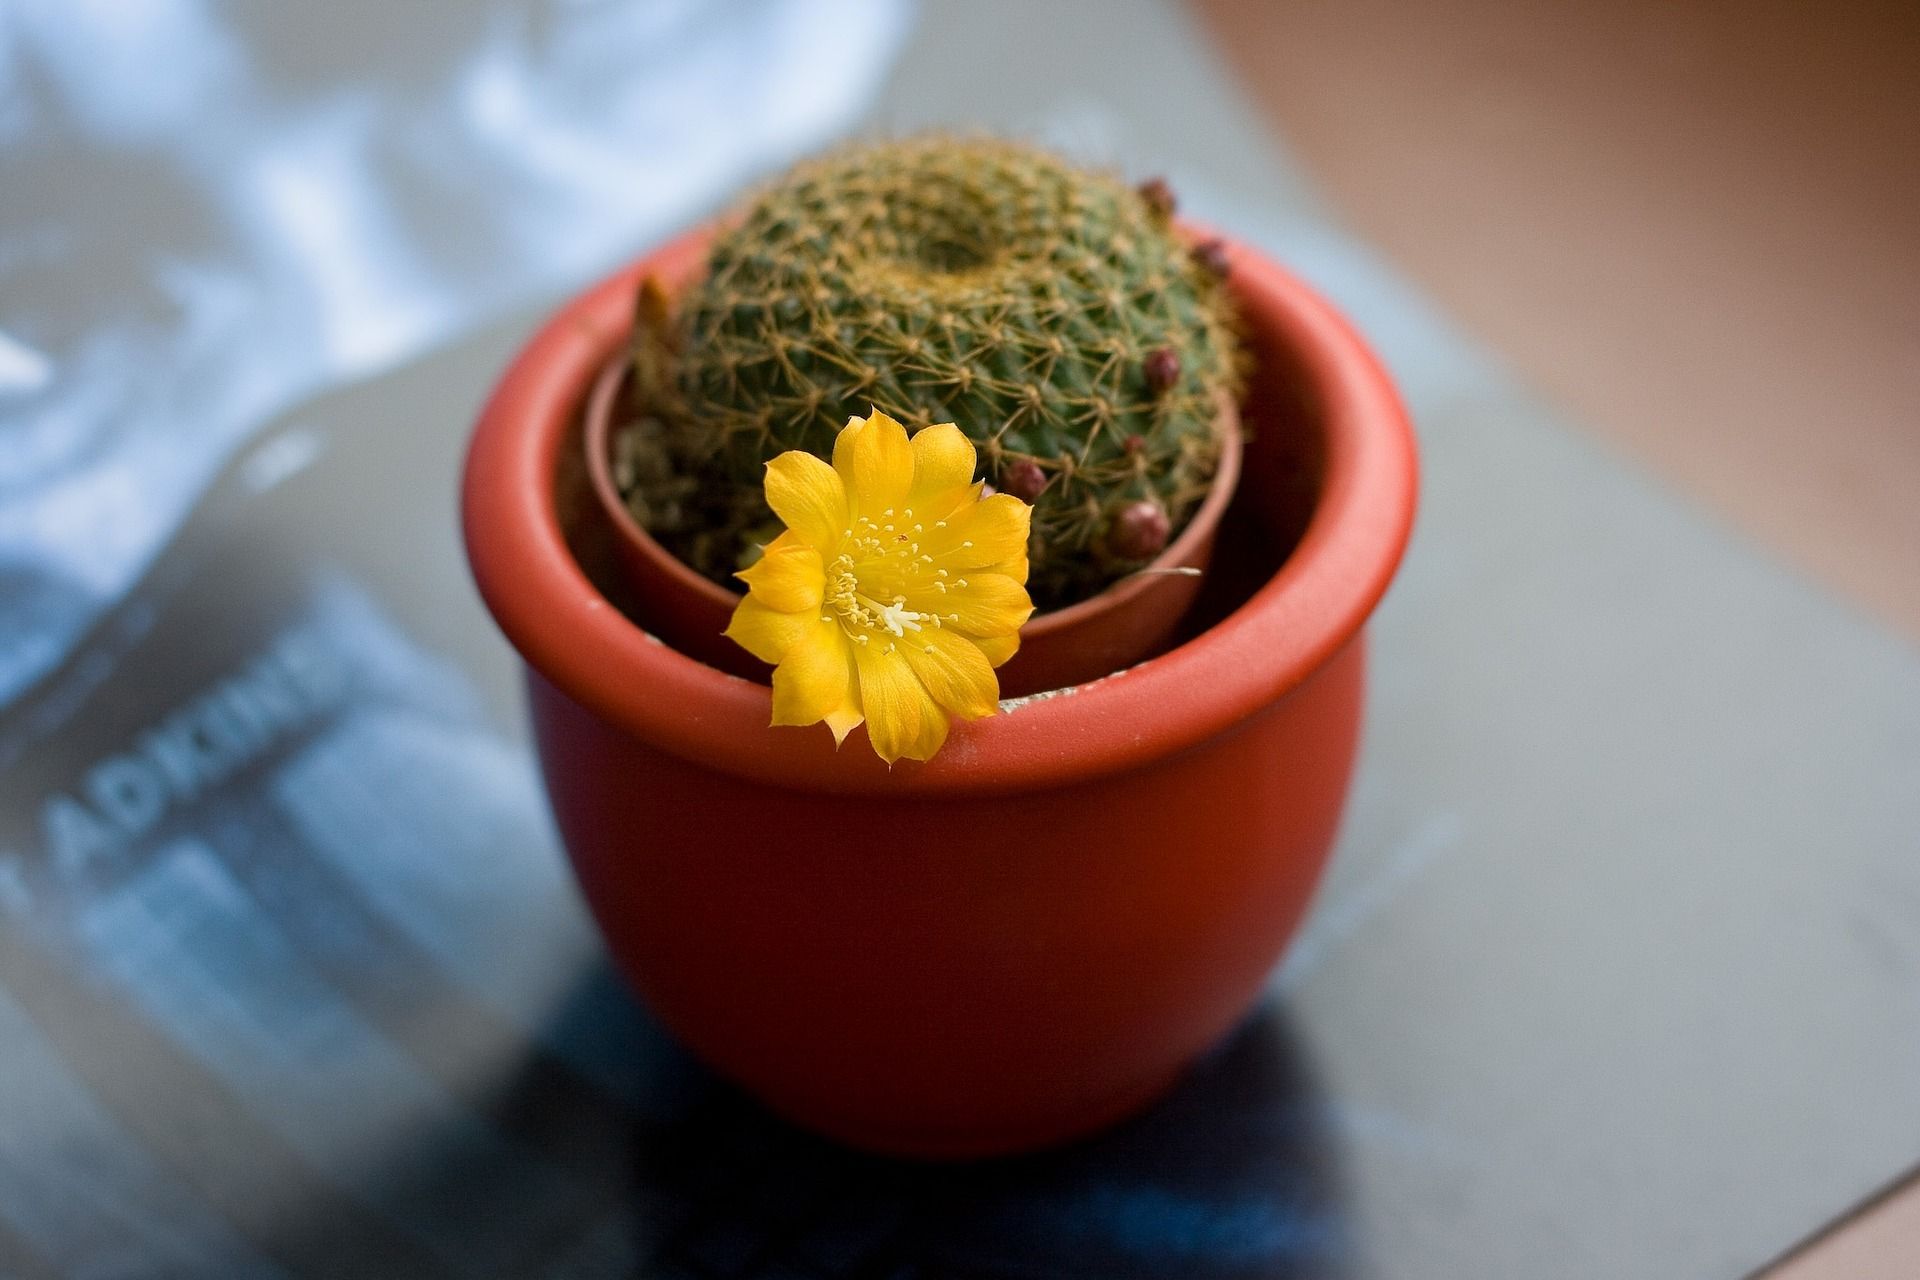 Cactus with bloom